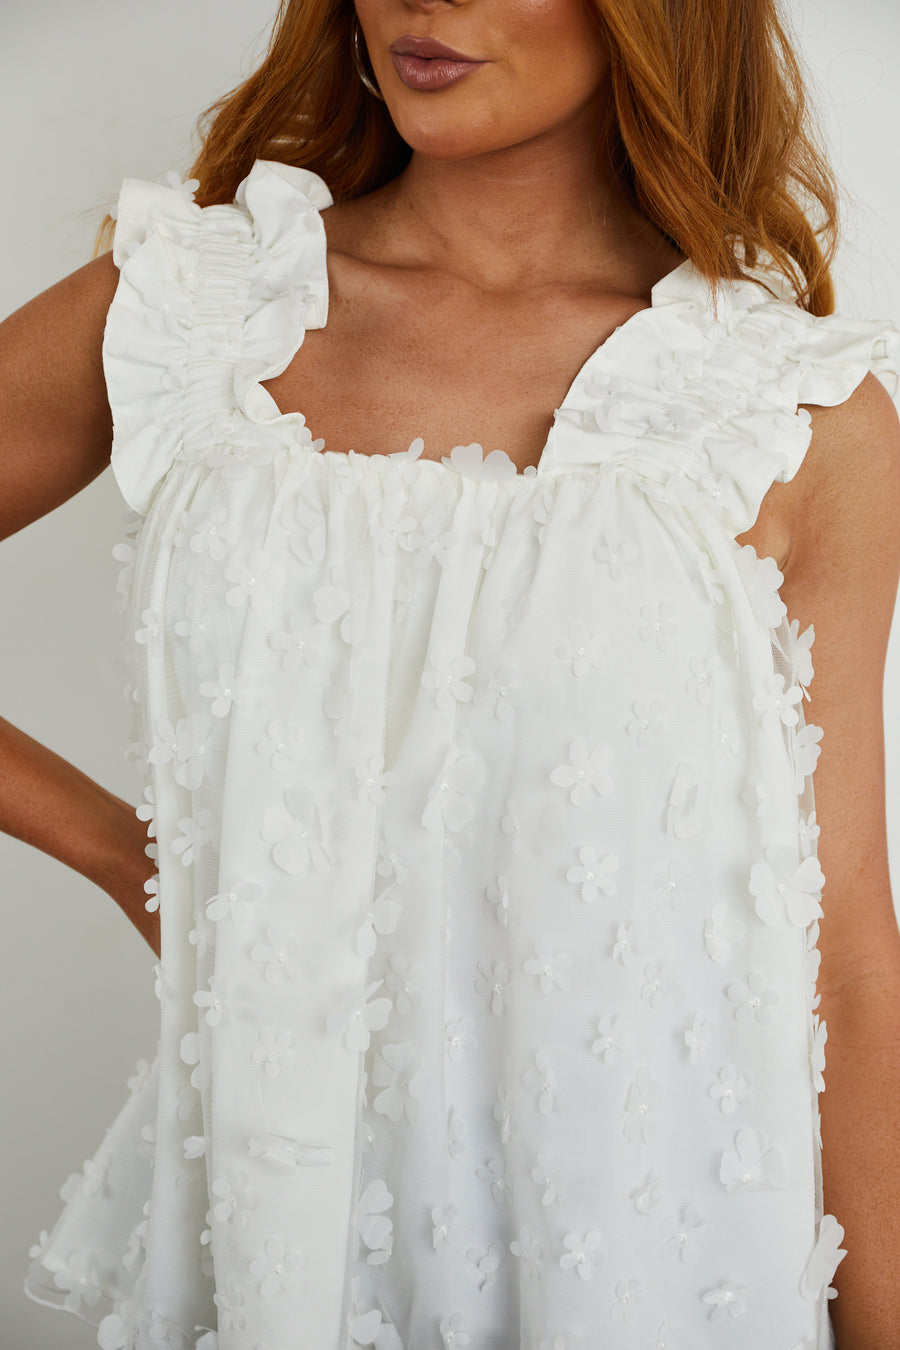 Pearl White Floral Embellished Sleeveless Blouse